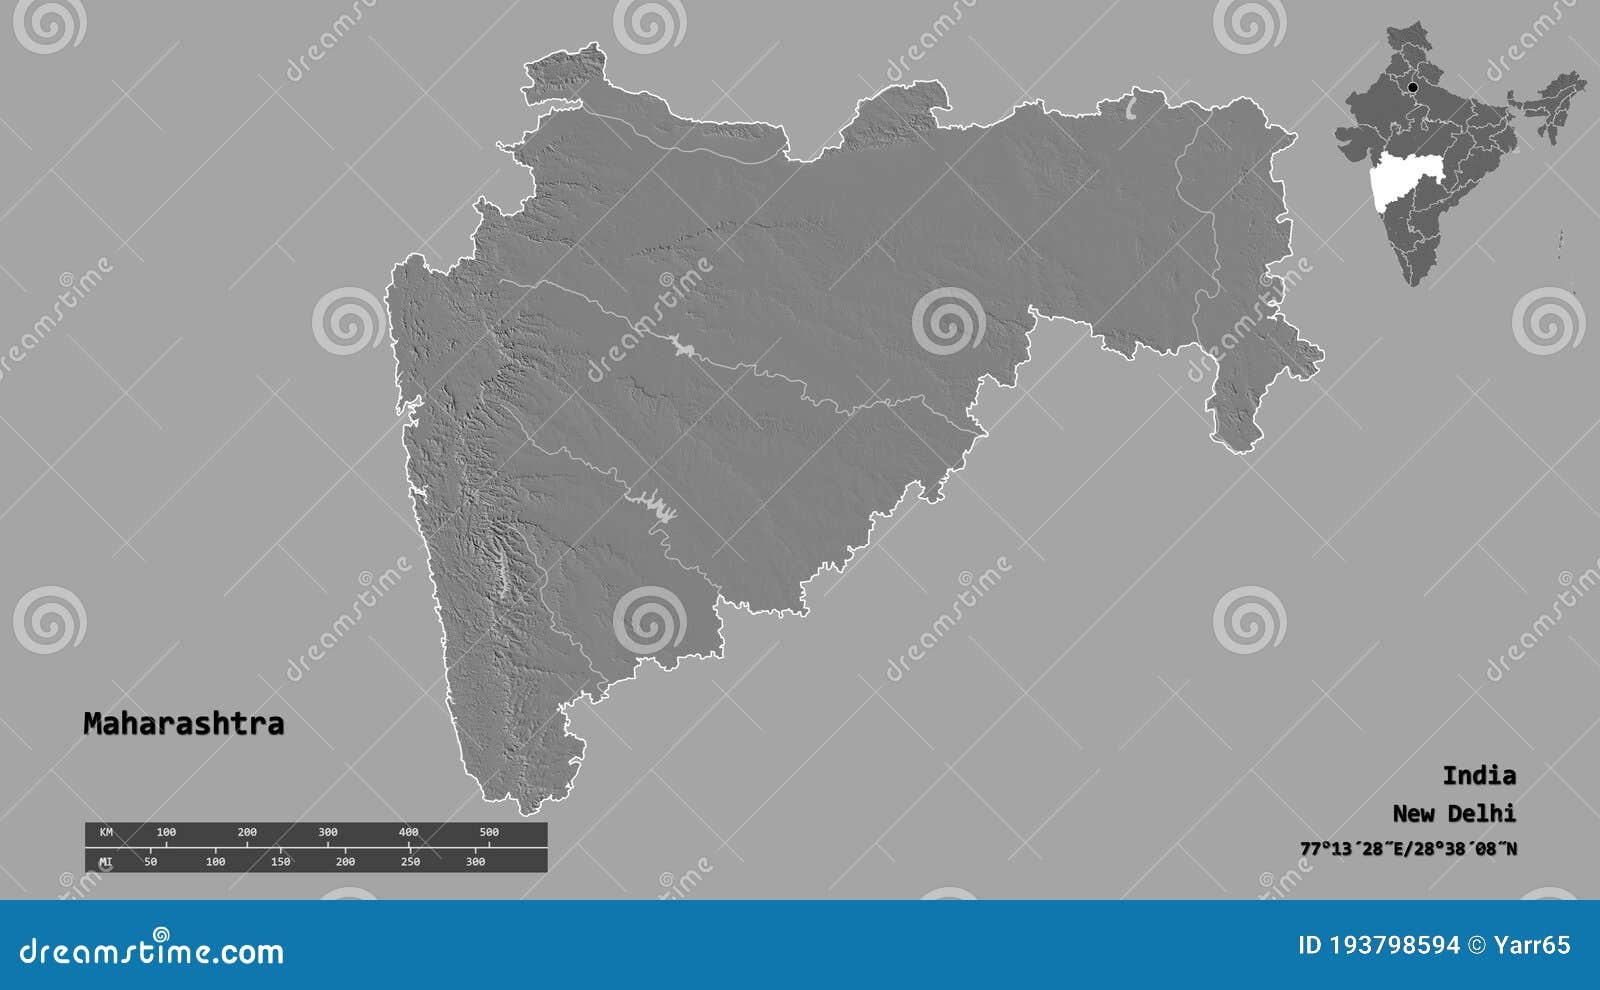 Maharashtra free map, free blank map, free outline map, free base map  outline, divisions, color, white